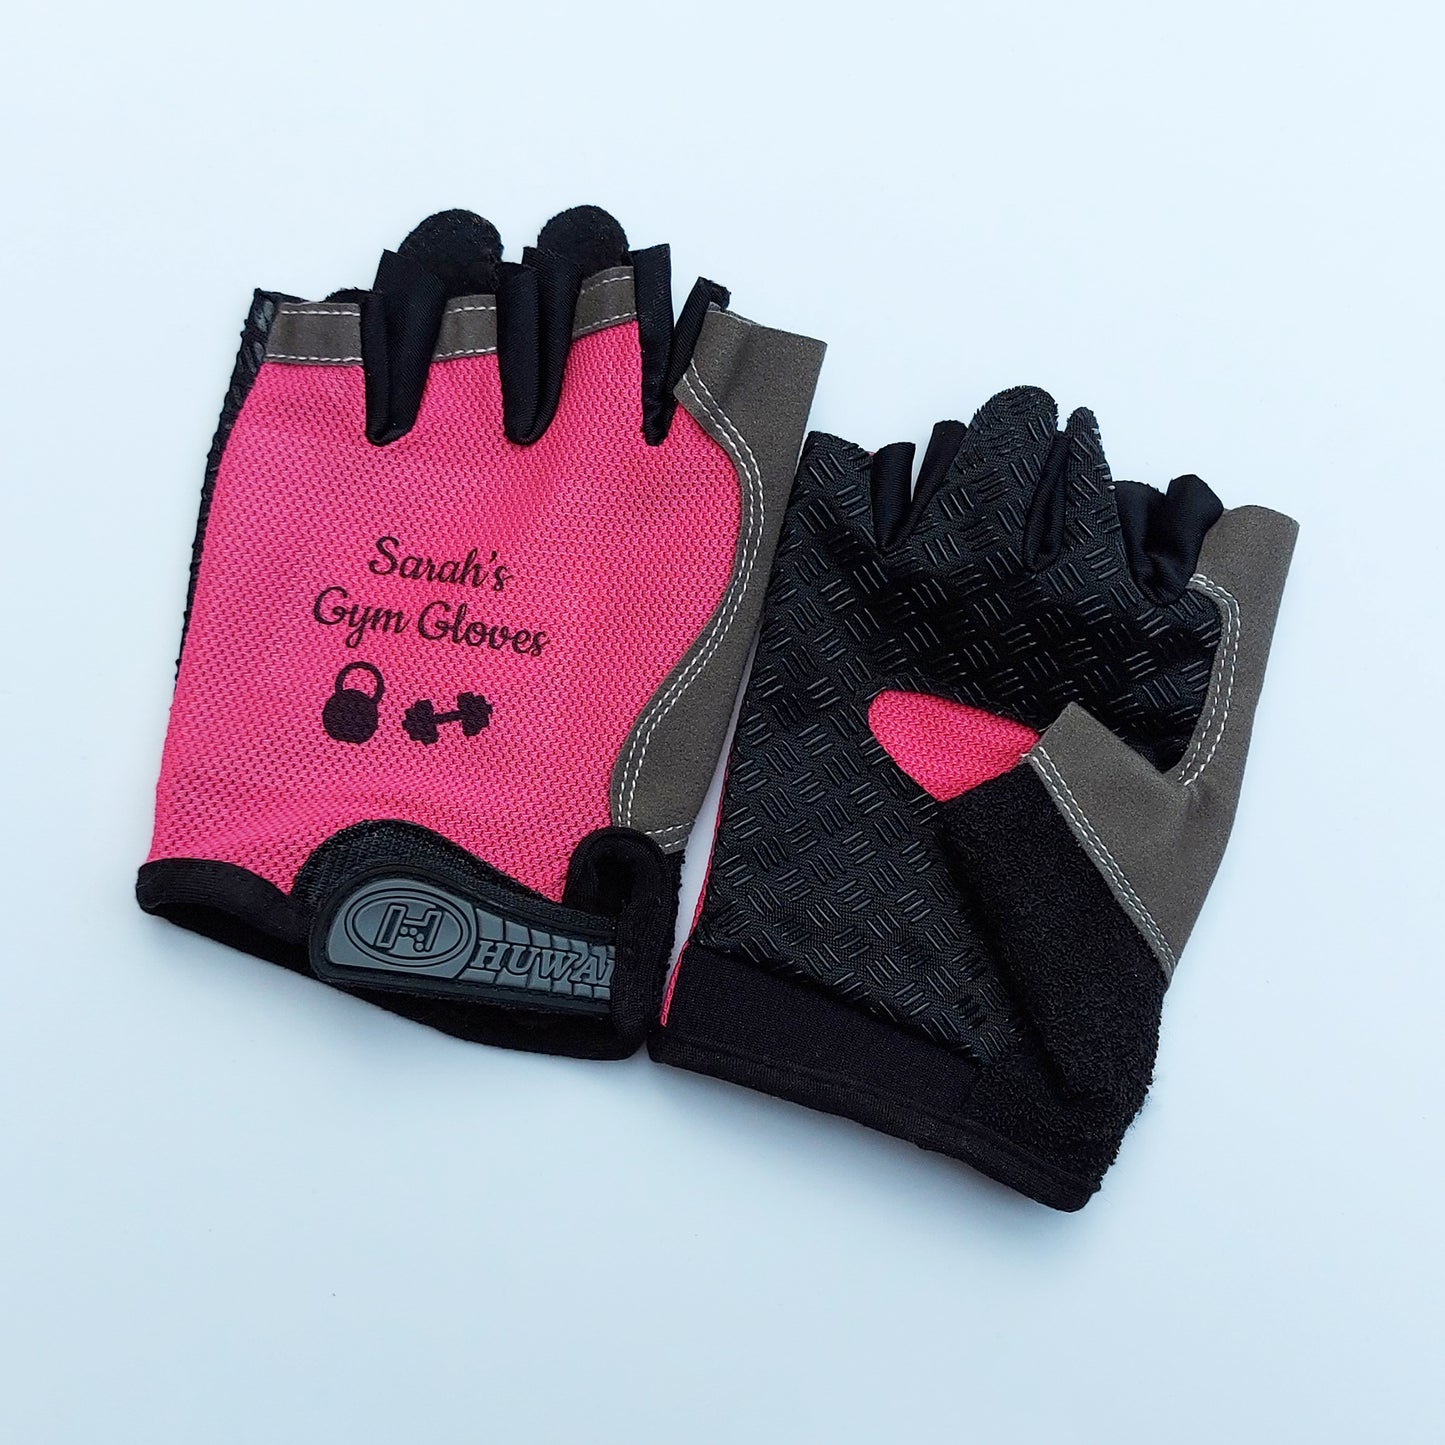 Personalised Women's Gym Gloves, Gifts for Gym Lovers, Workout Gloves, Friend Gift